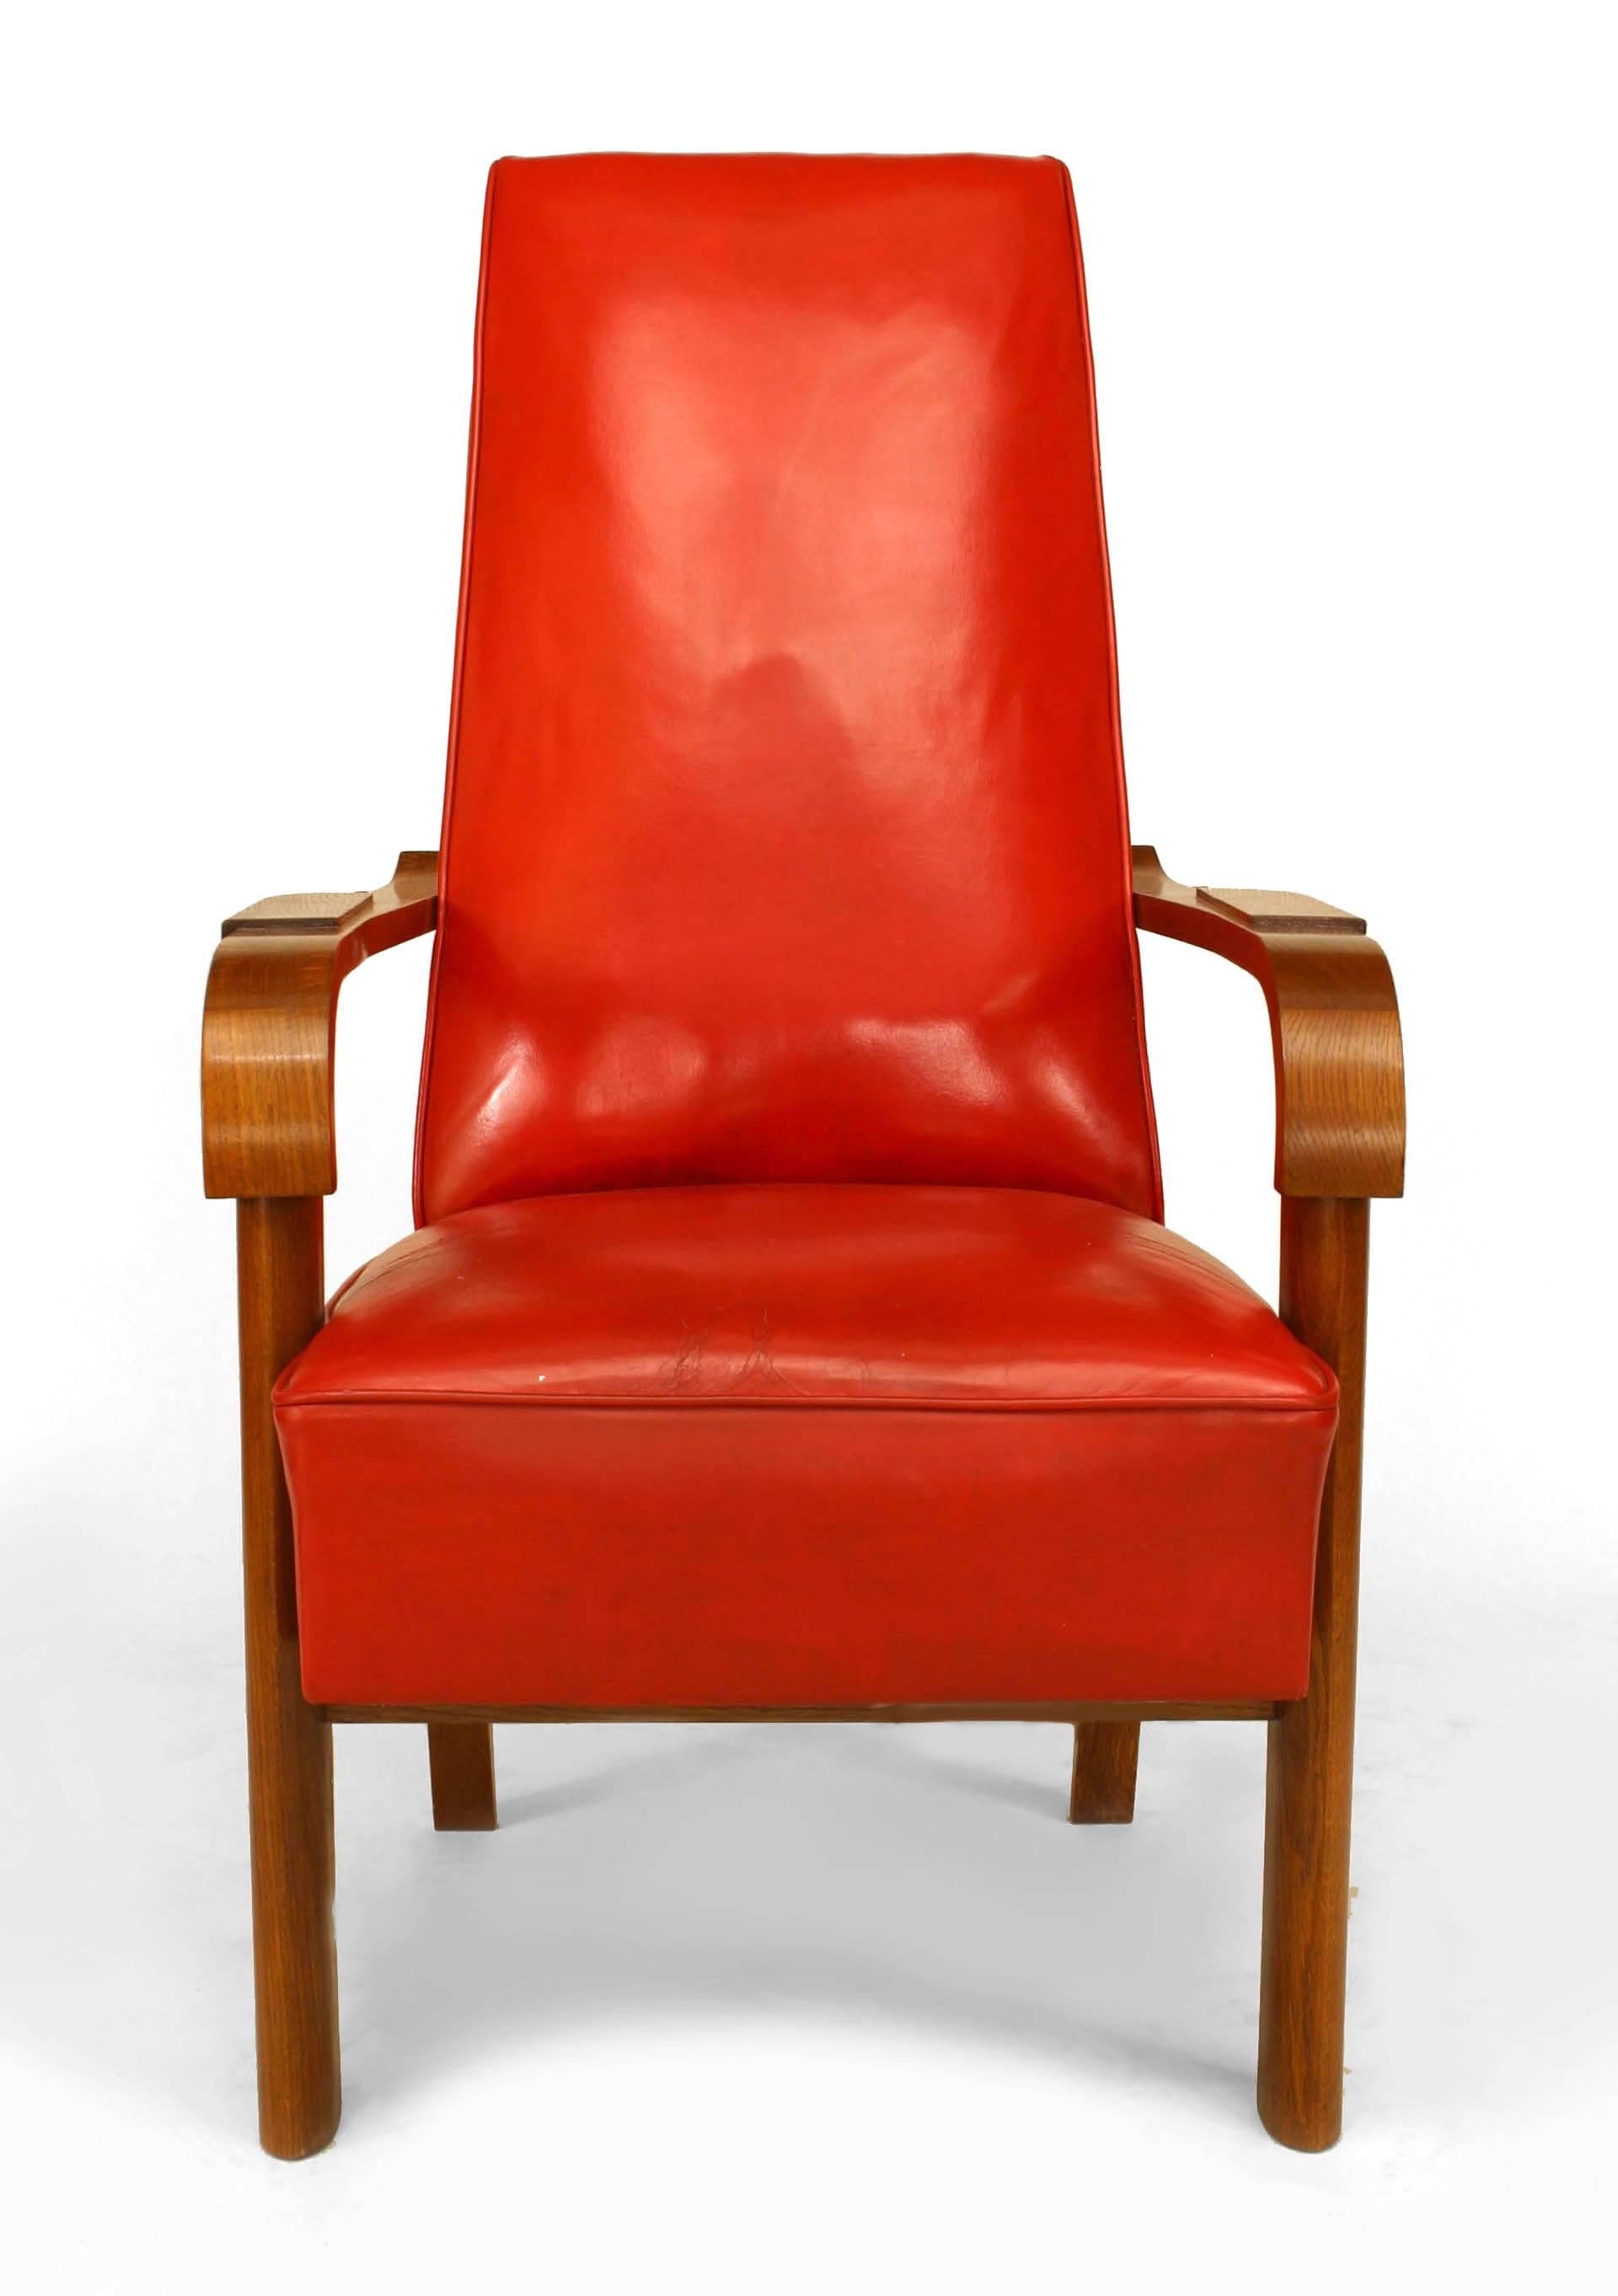 French 1940s oak arm chair with a high back and upholstered with a red leather seat and back. (C. DUDOUYT) (Matching desk: 060336)
